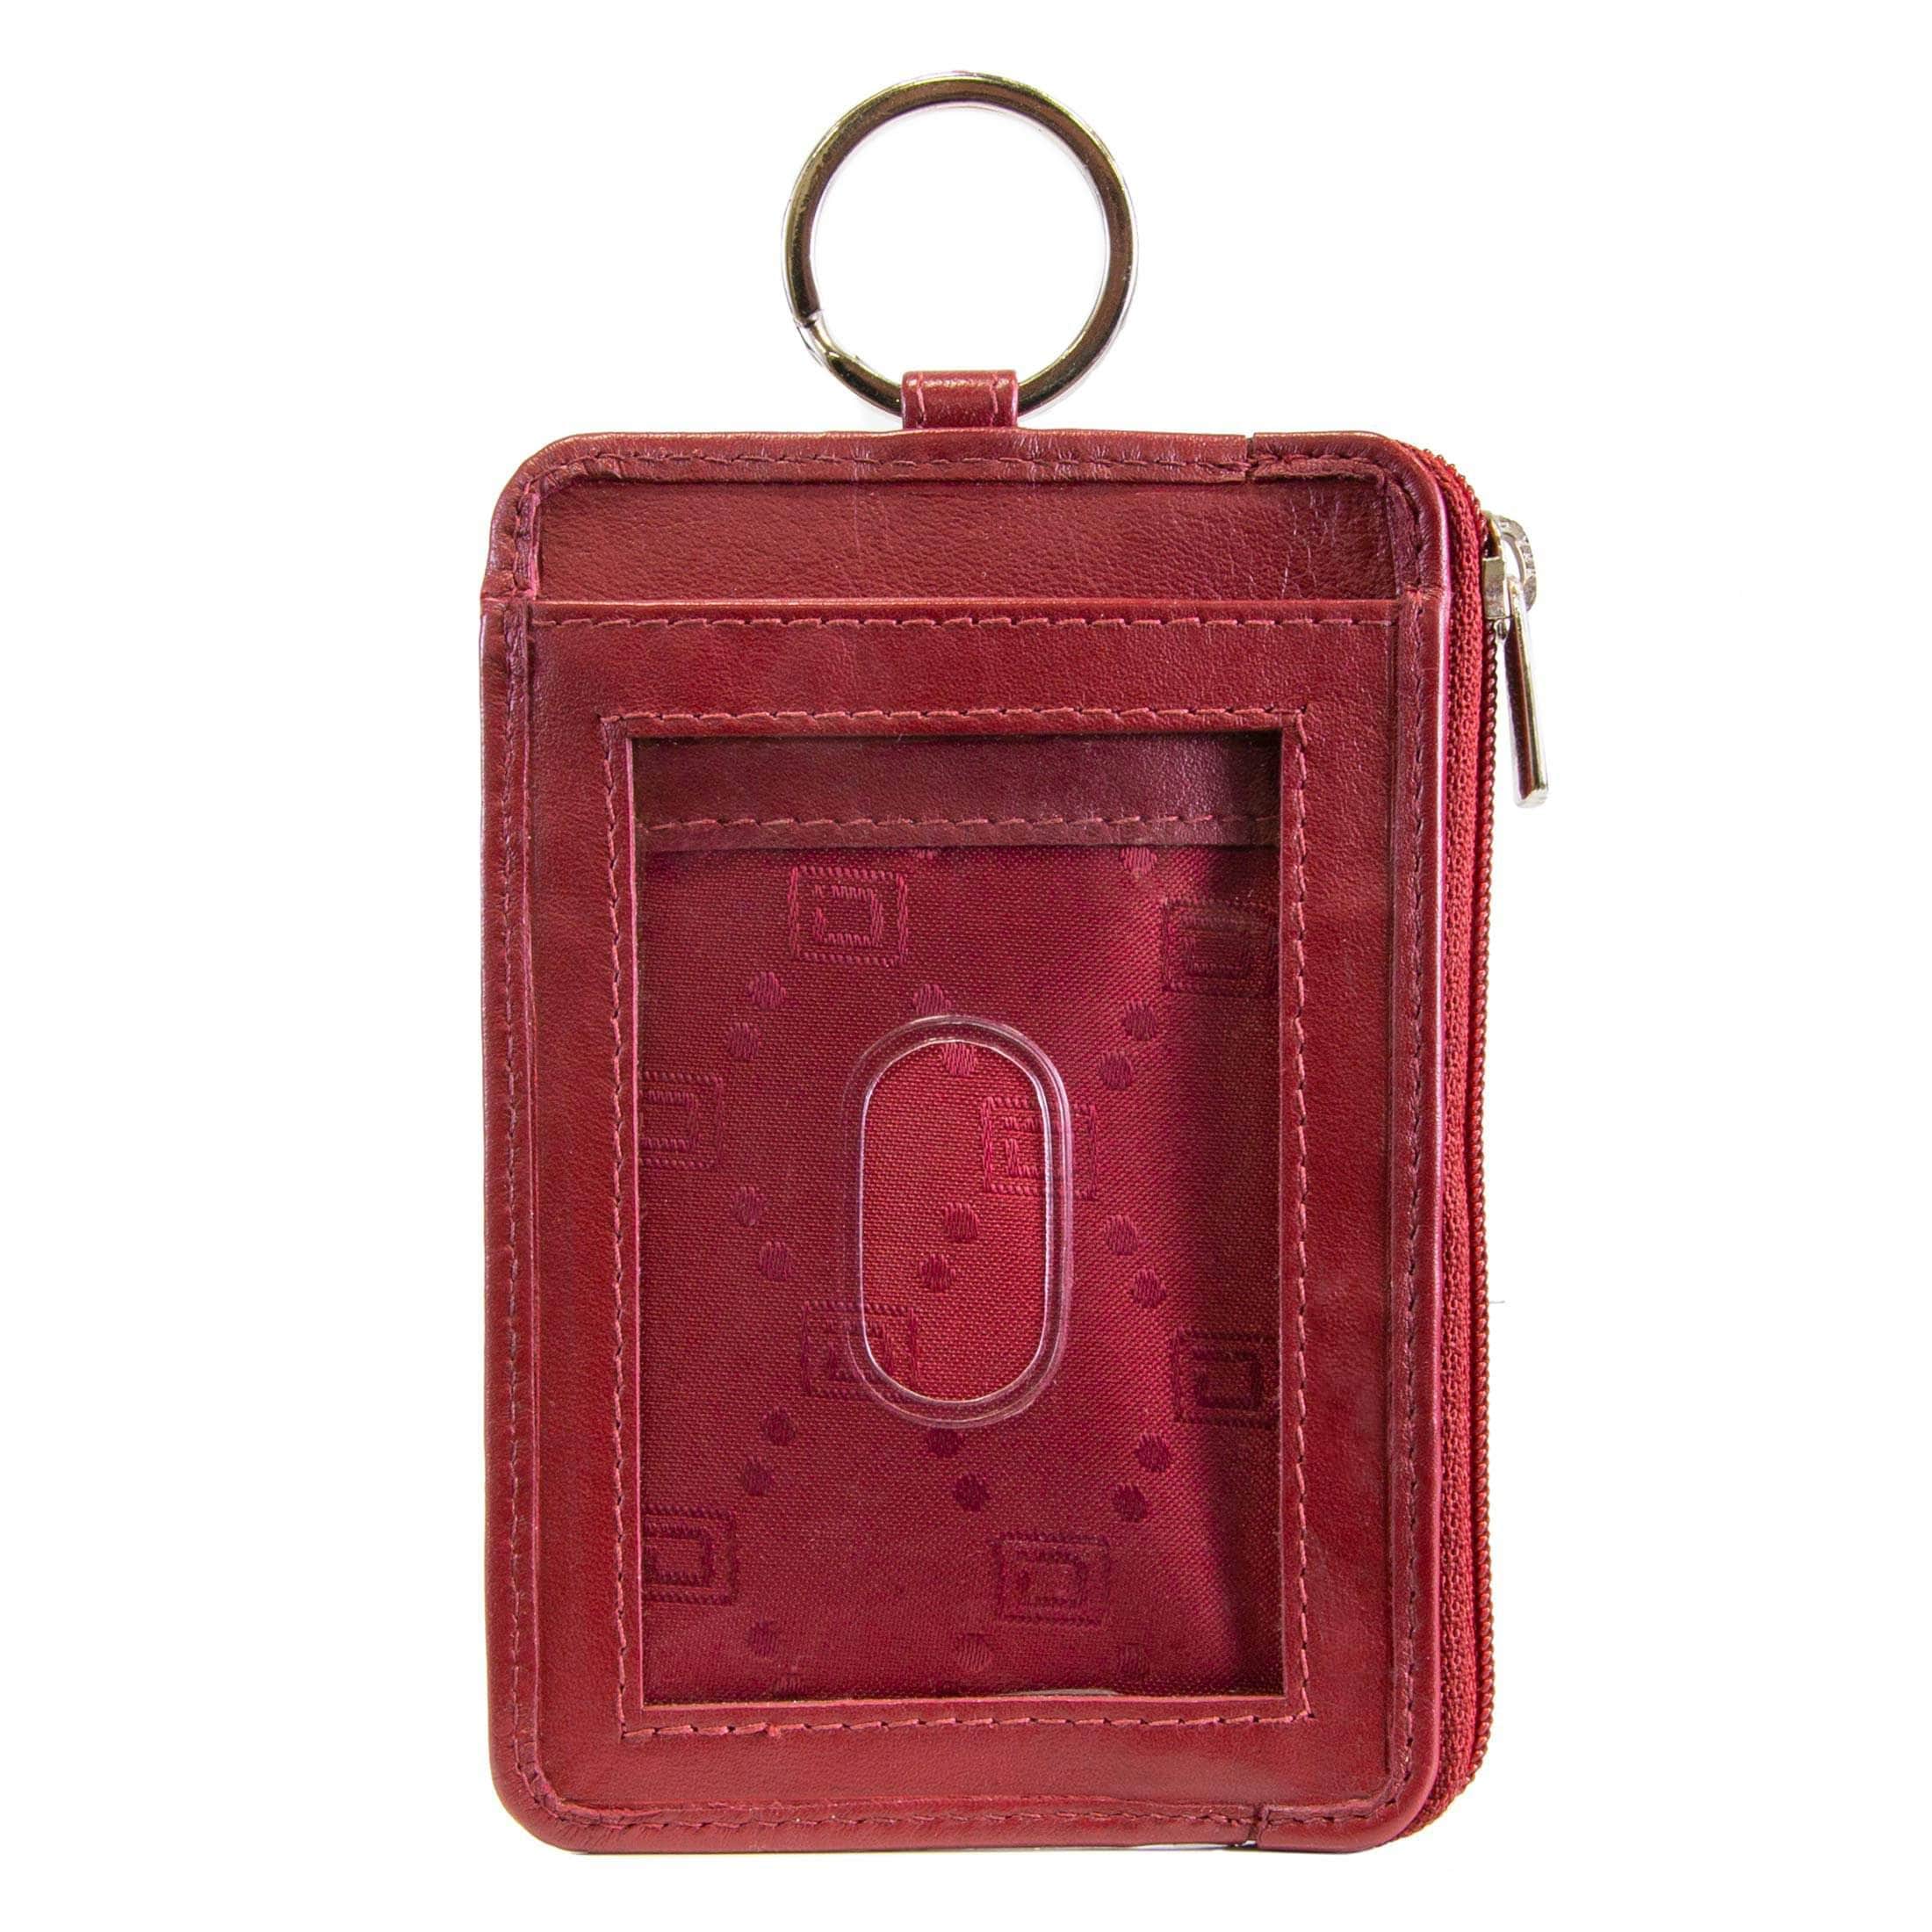 ID Stronghold Badgeholder Leather Mini Red RFID Wallet Dual Portrait ID Leather Badge Holder